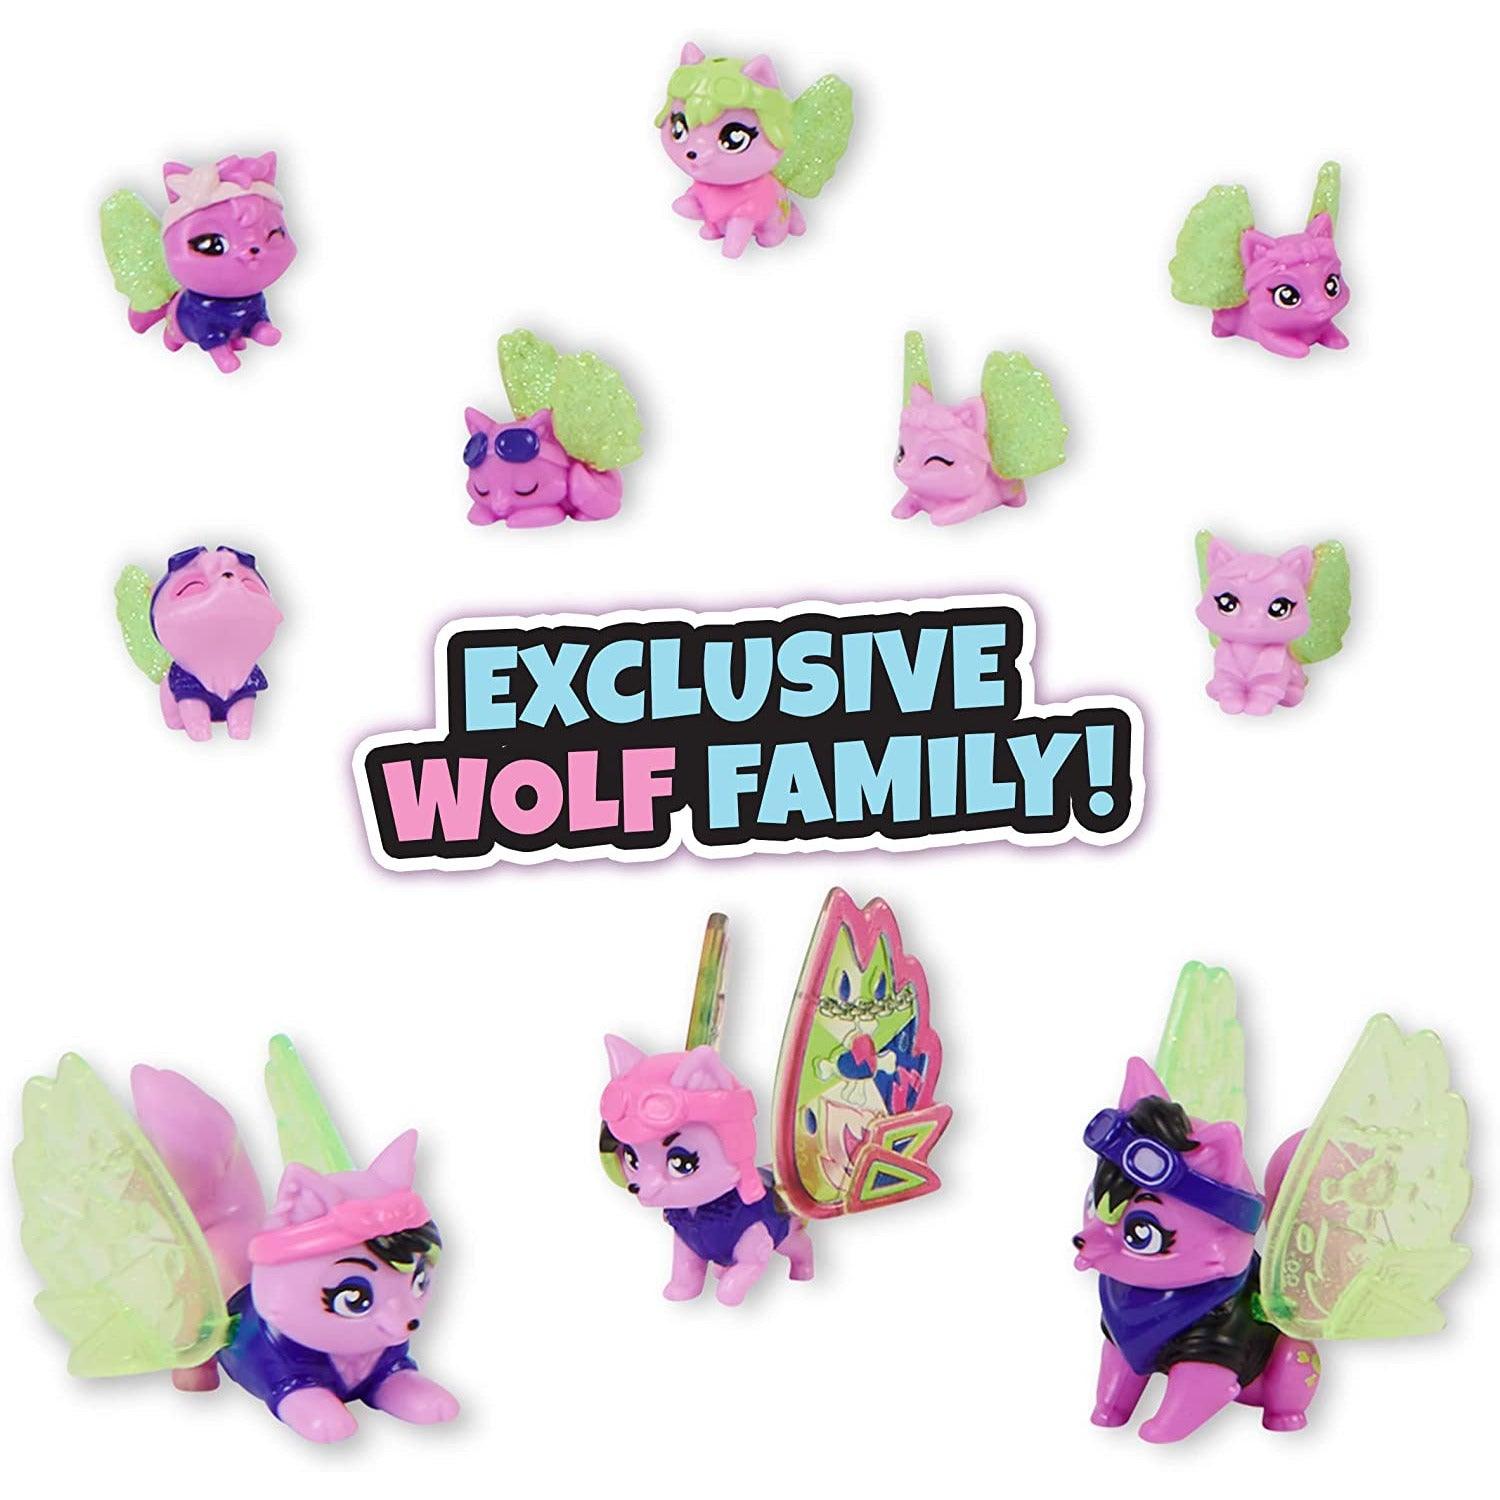 Hatchimals CollEGGtibles, Rainbow-Cation Wolf Family Carton with Surprise Playset. - BumbleToys - 5-7 Years, Girls, Hatchimals CollEGGtibles, Miniature Dolls & Accessories, Pre-Order